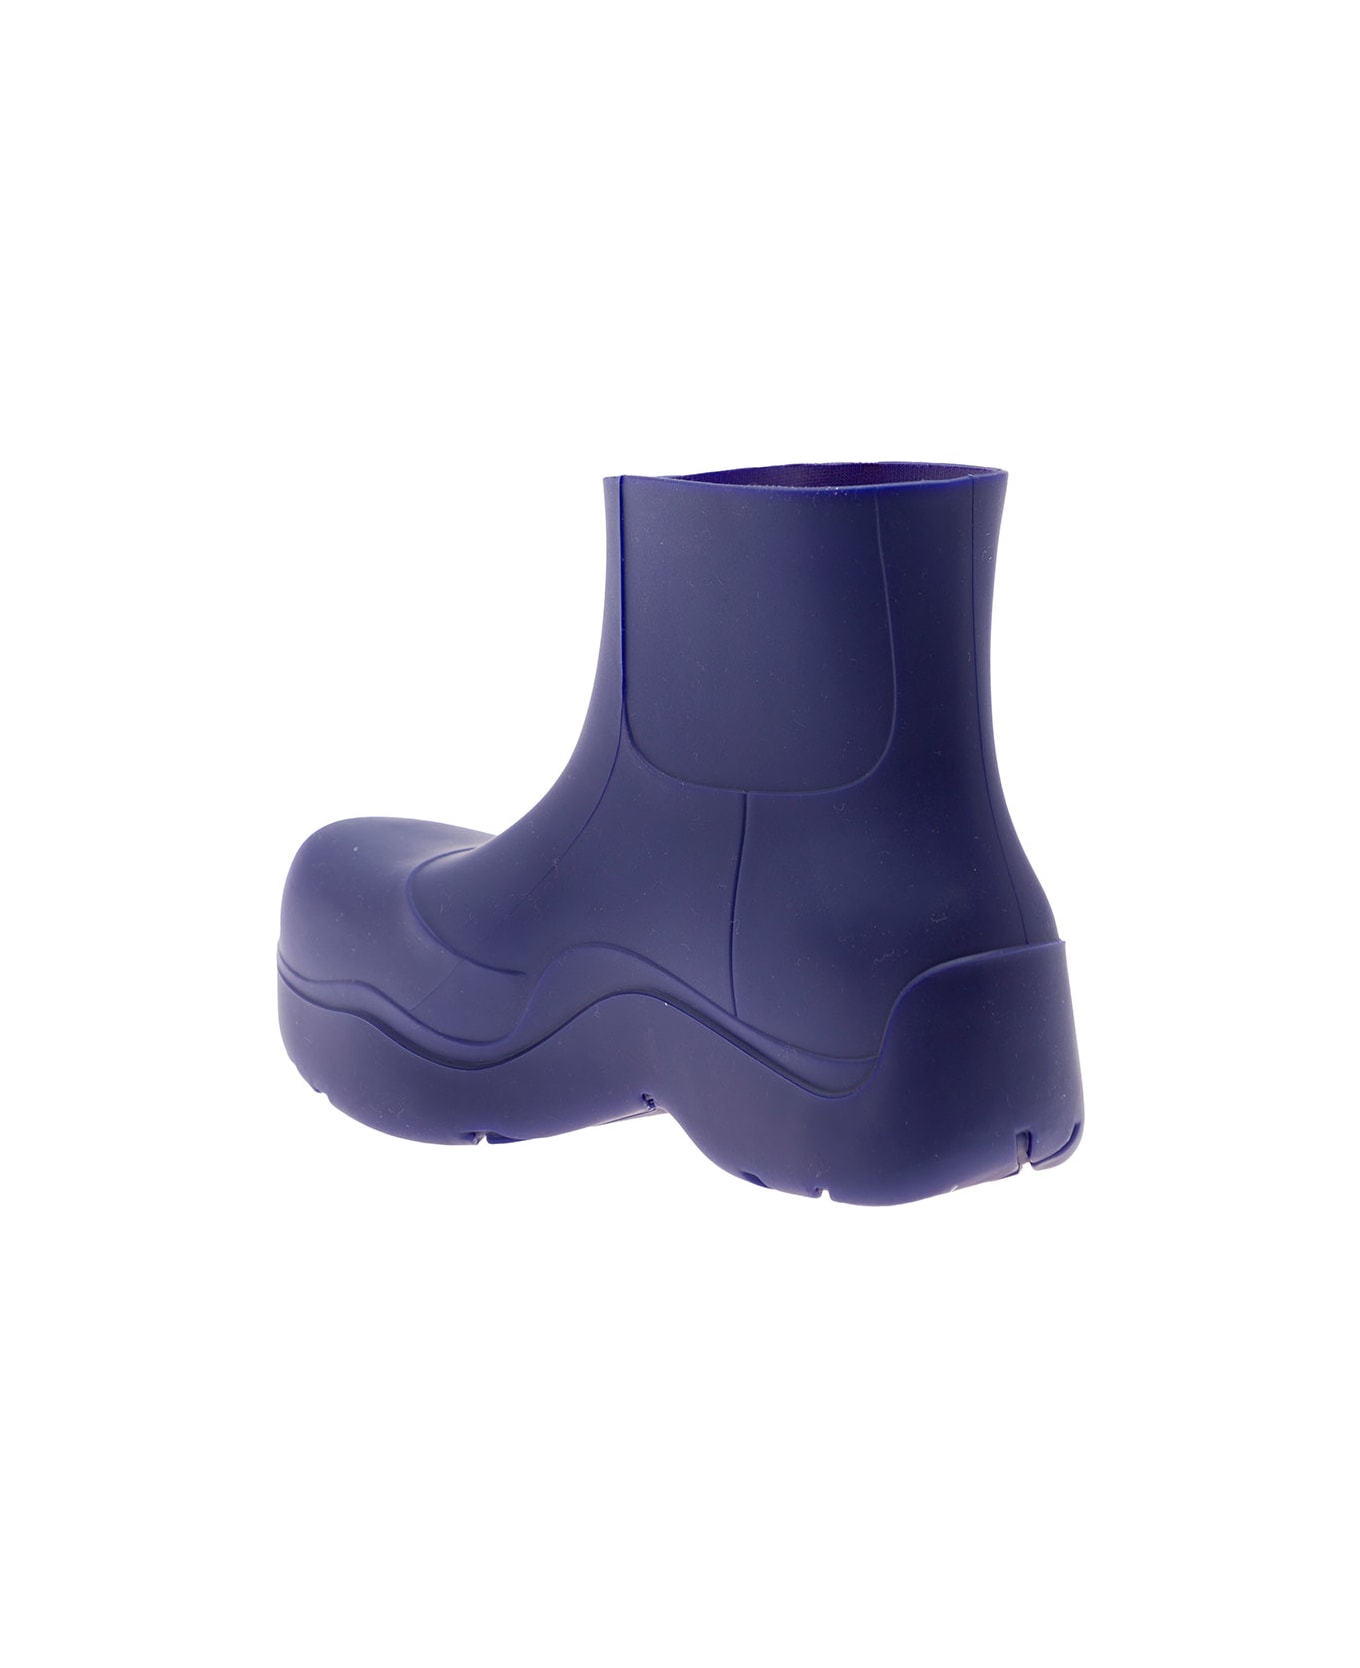 Bottega Veneta 'puddle' Blue Boots With Chunky Platform And Matte Finish In Rubber Woman - Violet